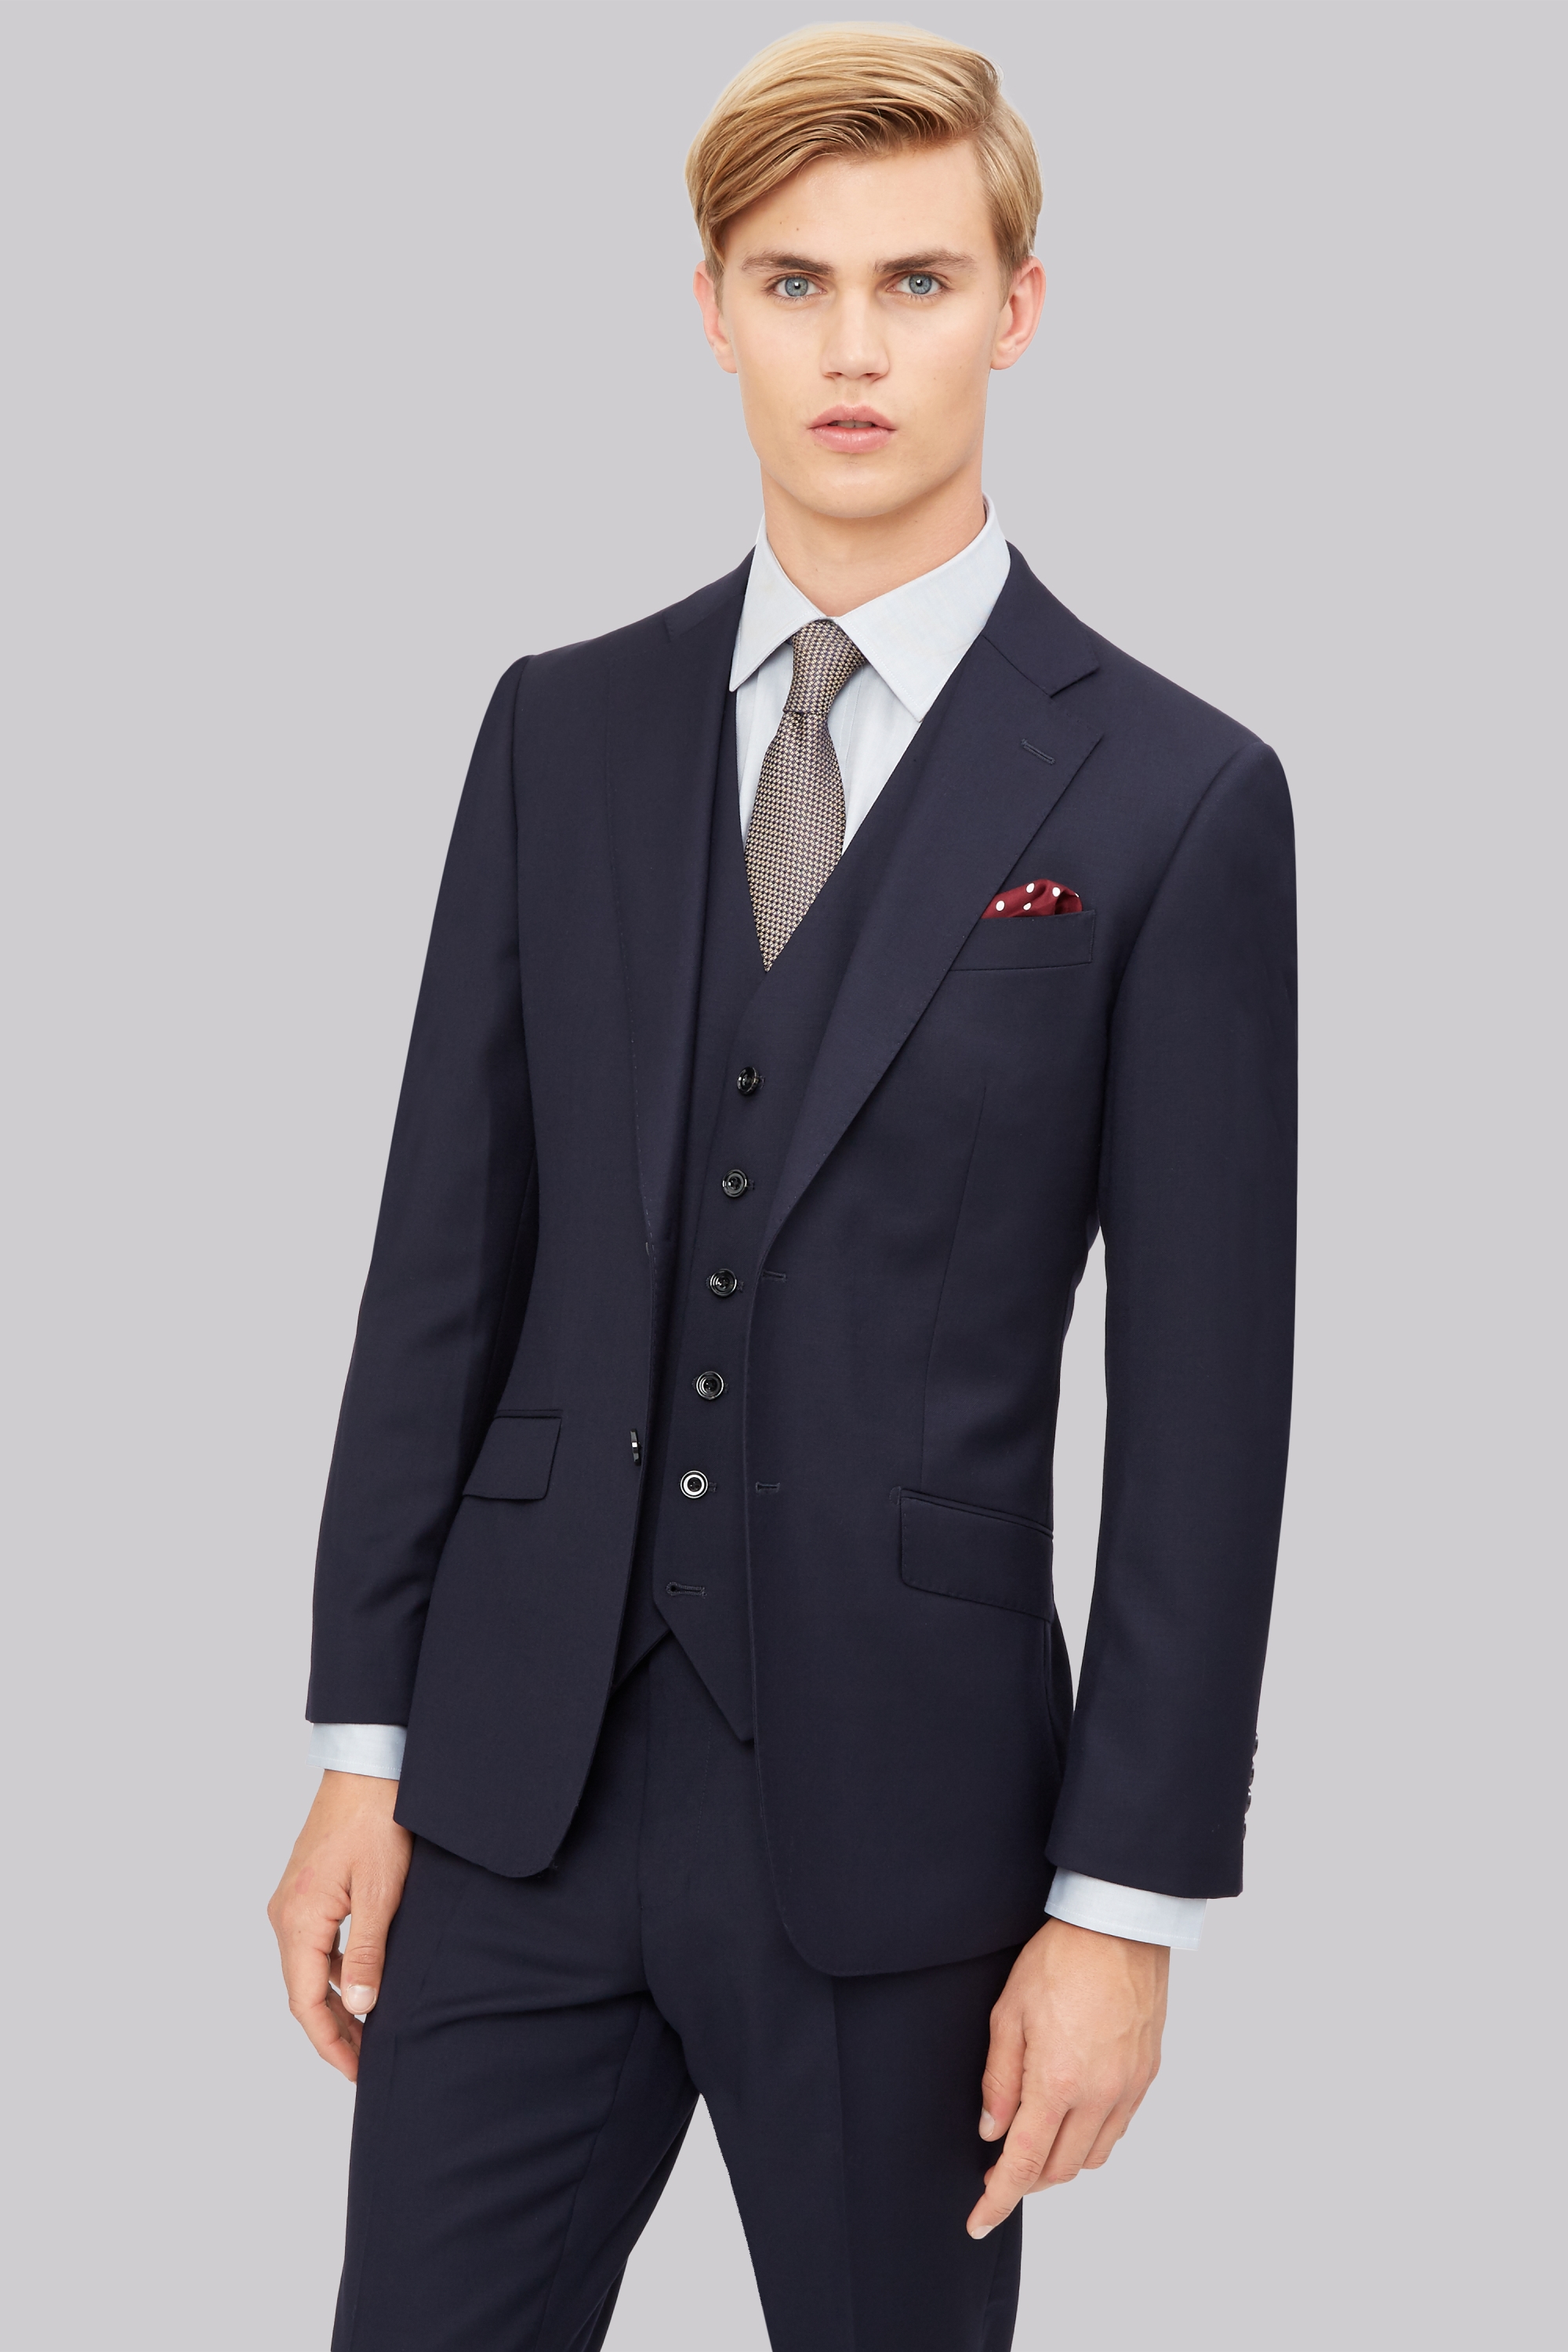 Hardy Amies Tailored Fit Navy Suit